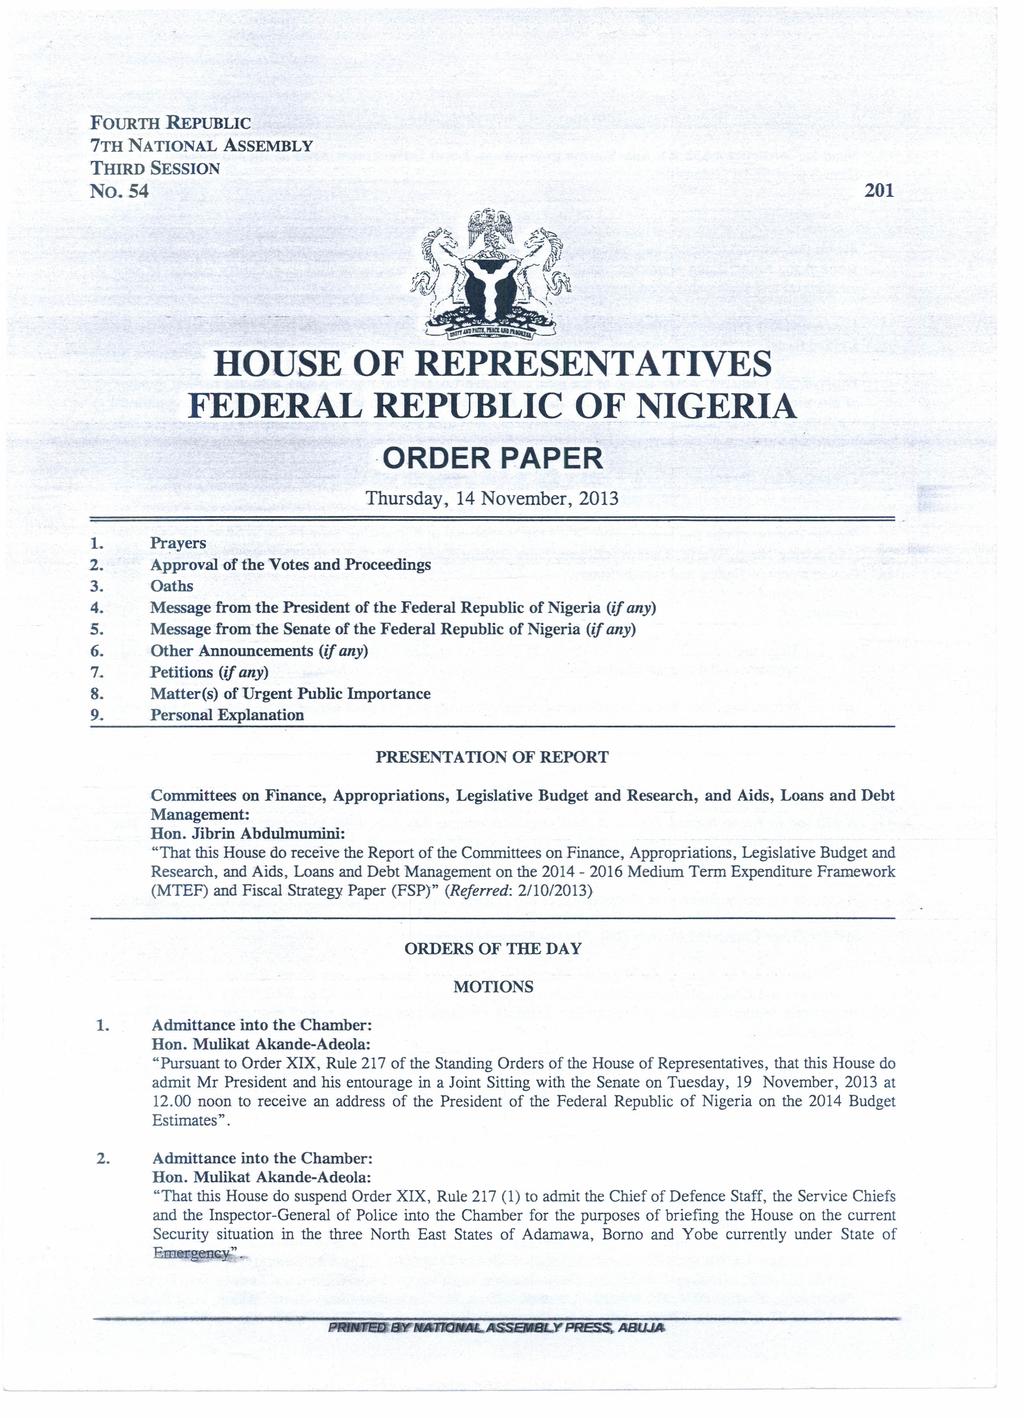 FOURTH REpUBLIC 7TH NATIONAL ASSEMBLY THIRD SESSION No. 54 201 HOUSE OF REPRESENTATIVES FEDERAL REPUBLIC OF NIGERIA ORDER PAPER 14 November, 2013 L Prayers 2. Approval of the Votes and Proceedings 3.